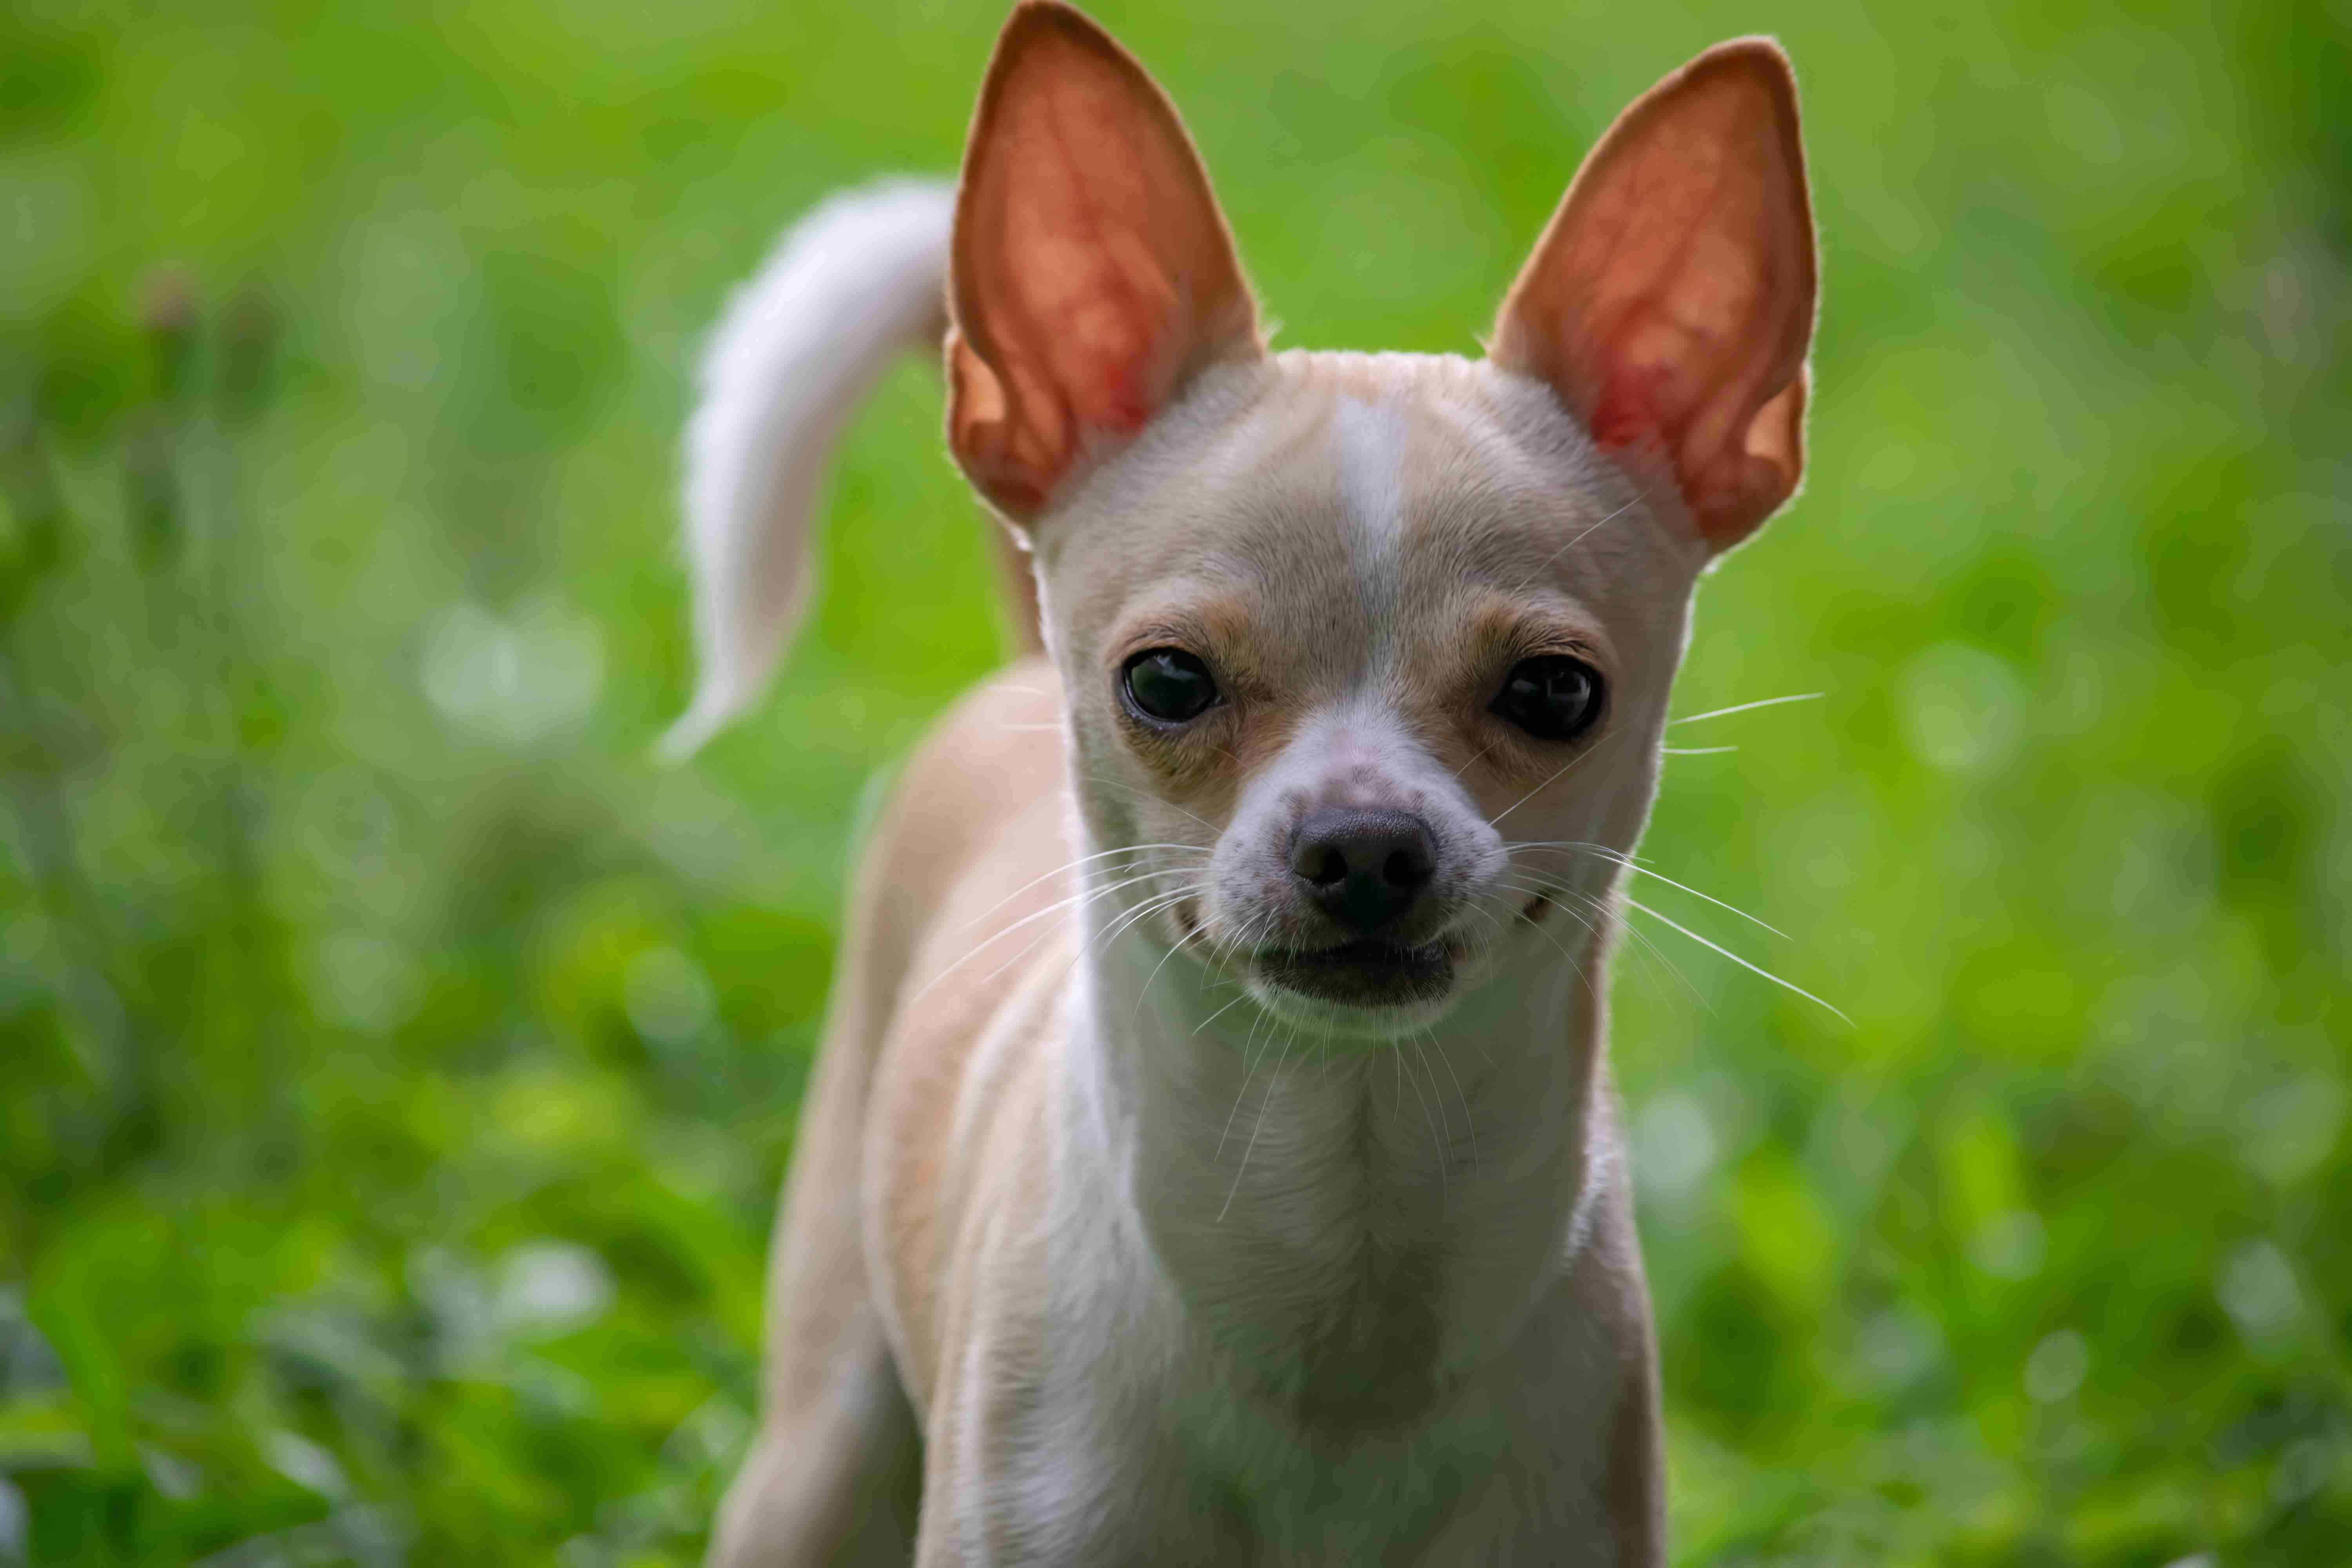 How can you redirect a Chihuahua's anger towards more appropriate behaviors?